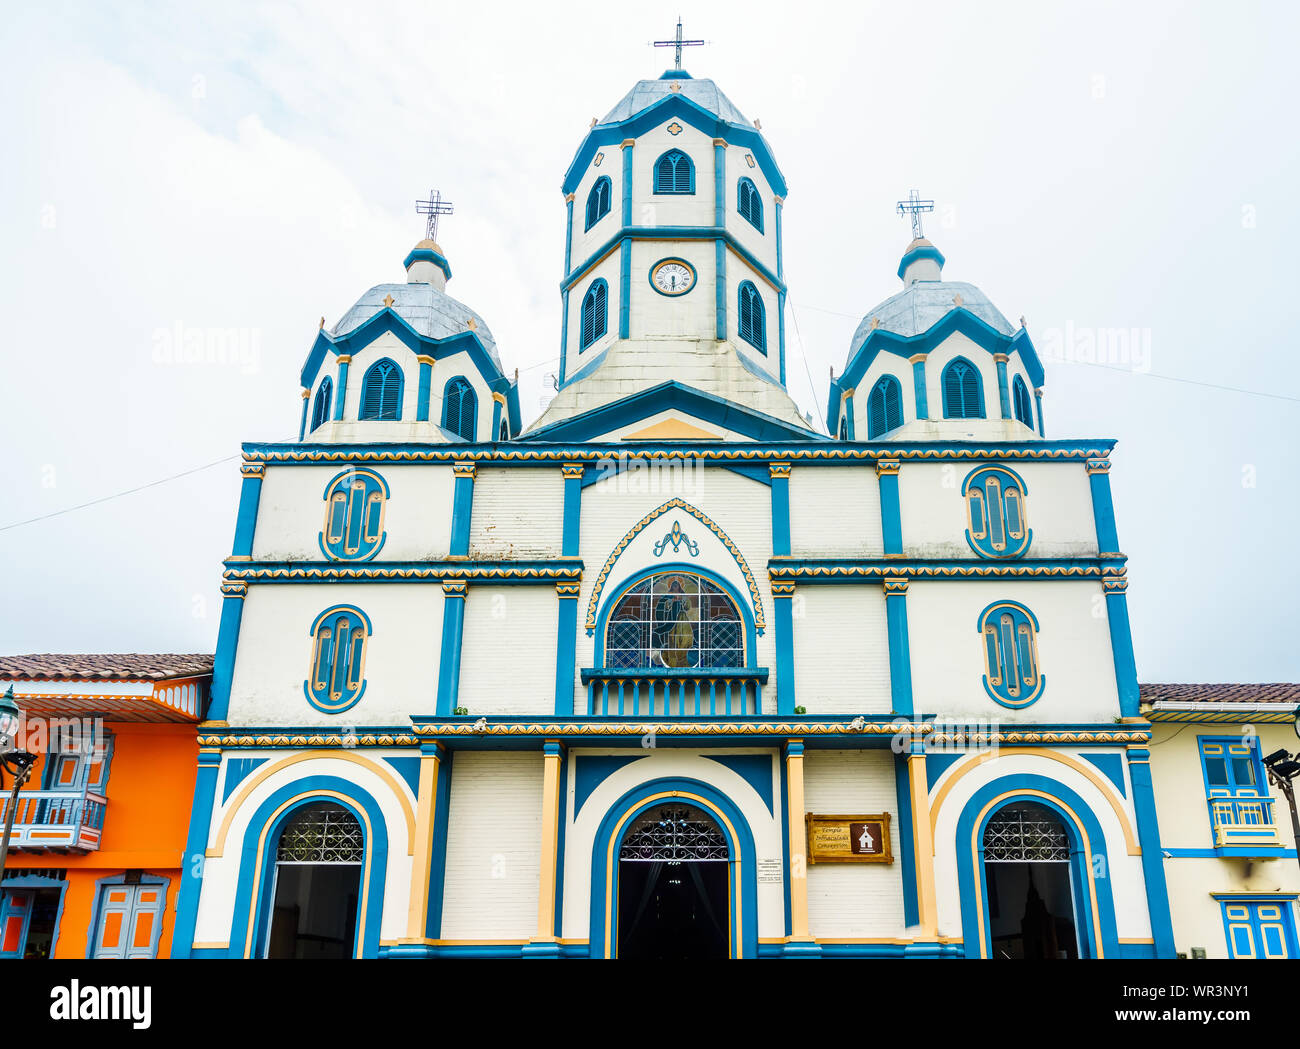 View on colonial church in the town of Filandia in Colombia Stock Photo